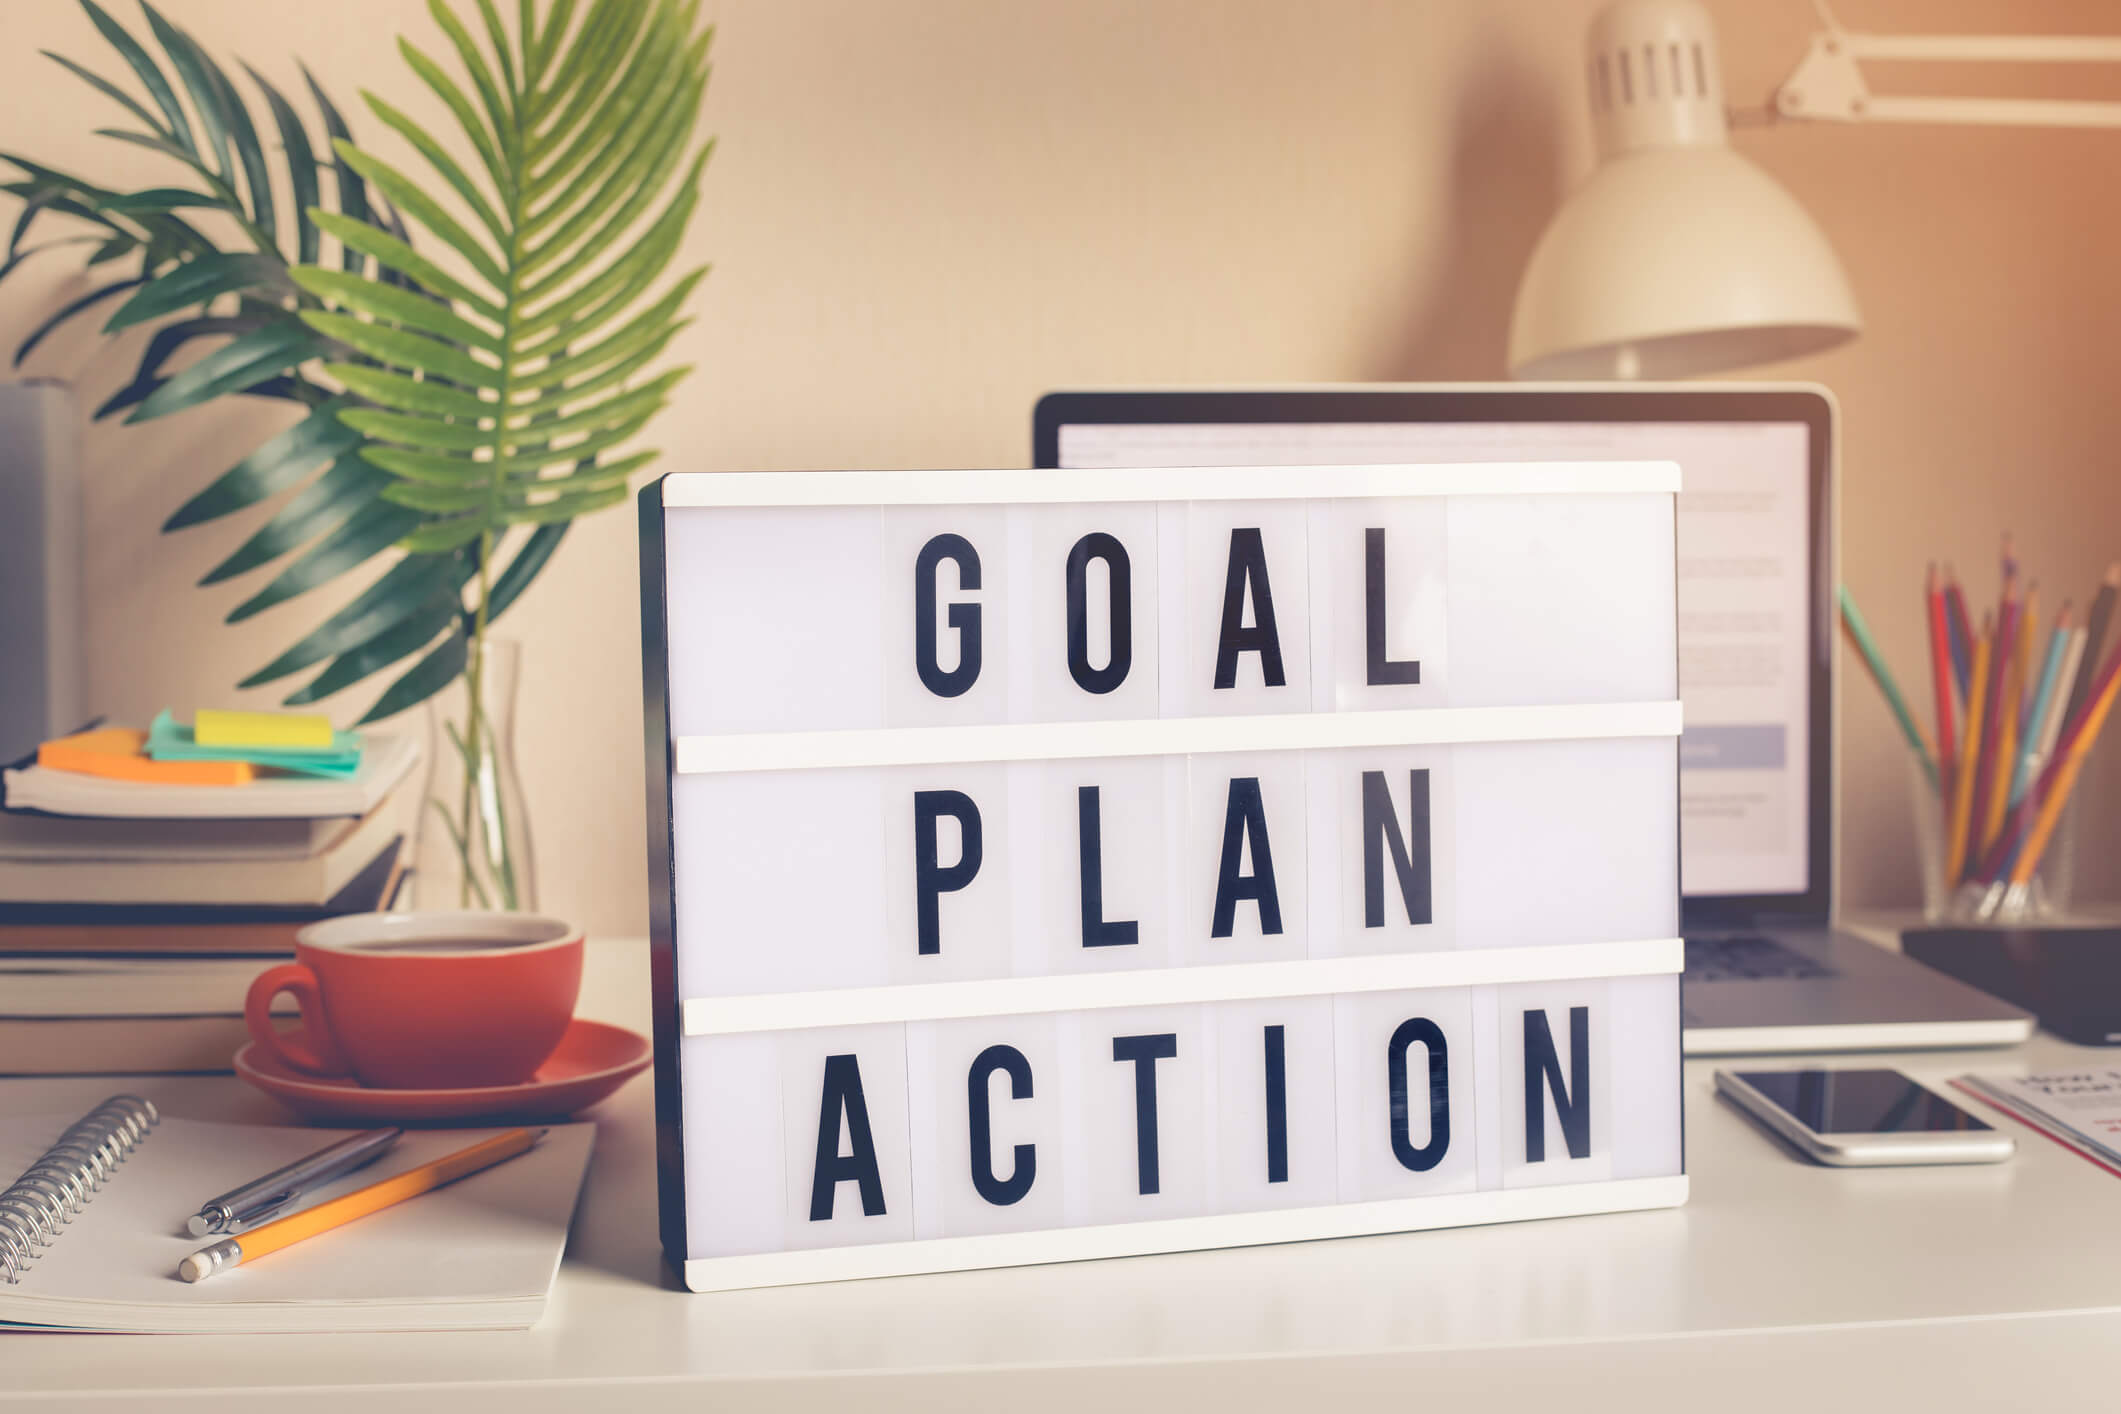 Goal, plan, action text on light box on desk table in home office.Business motivation or inspiration,performance of human concepts ideas